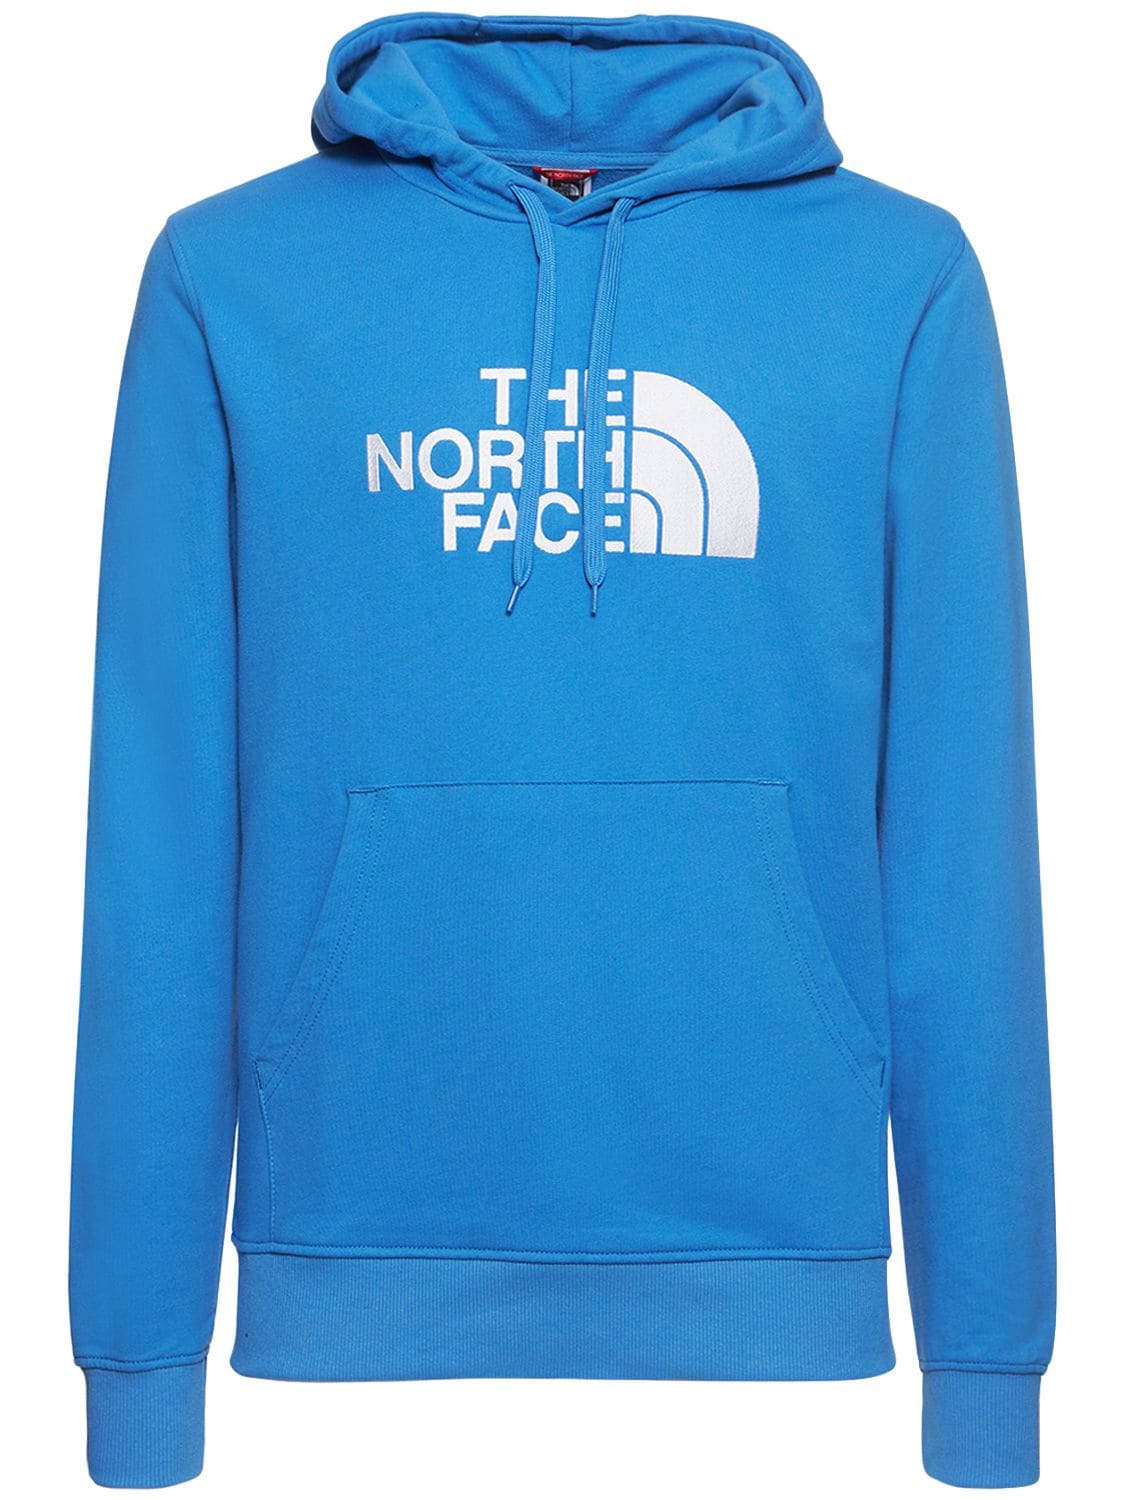 The North Face Light Drew Peak Hoodie In Supersonic Blue